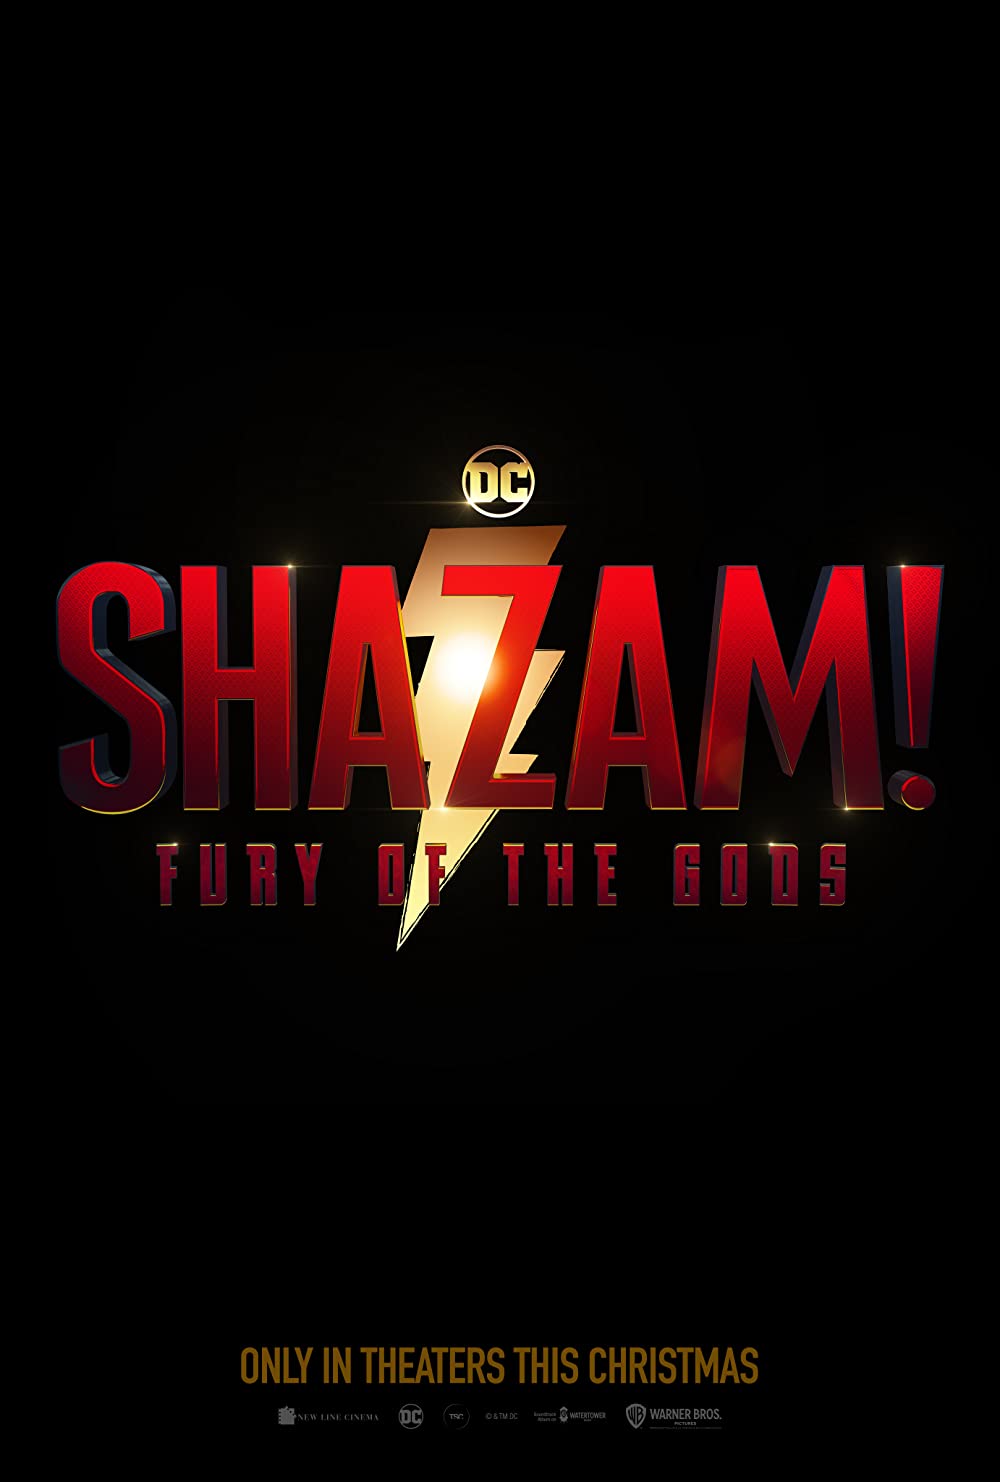 Shazam! Fury of the Gods Trailer out now!